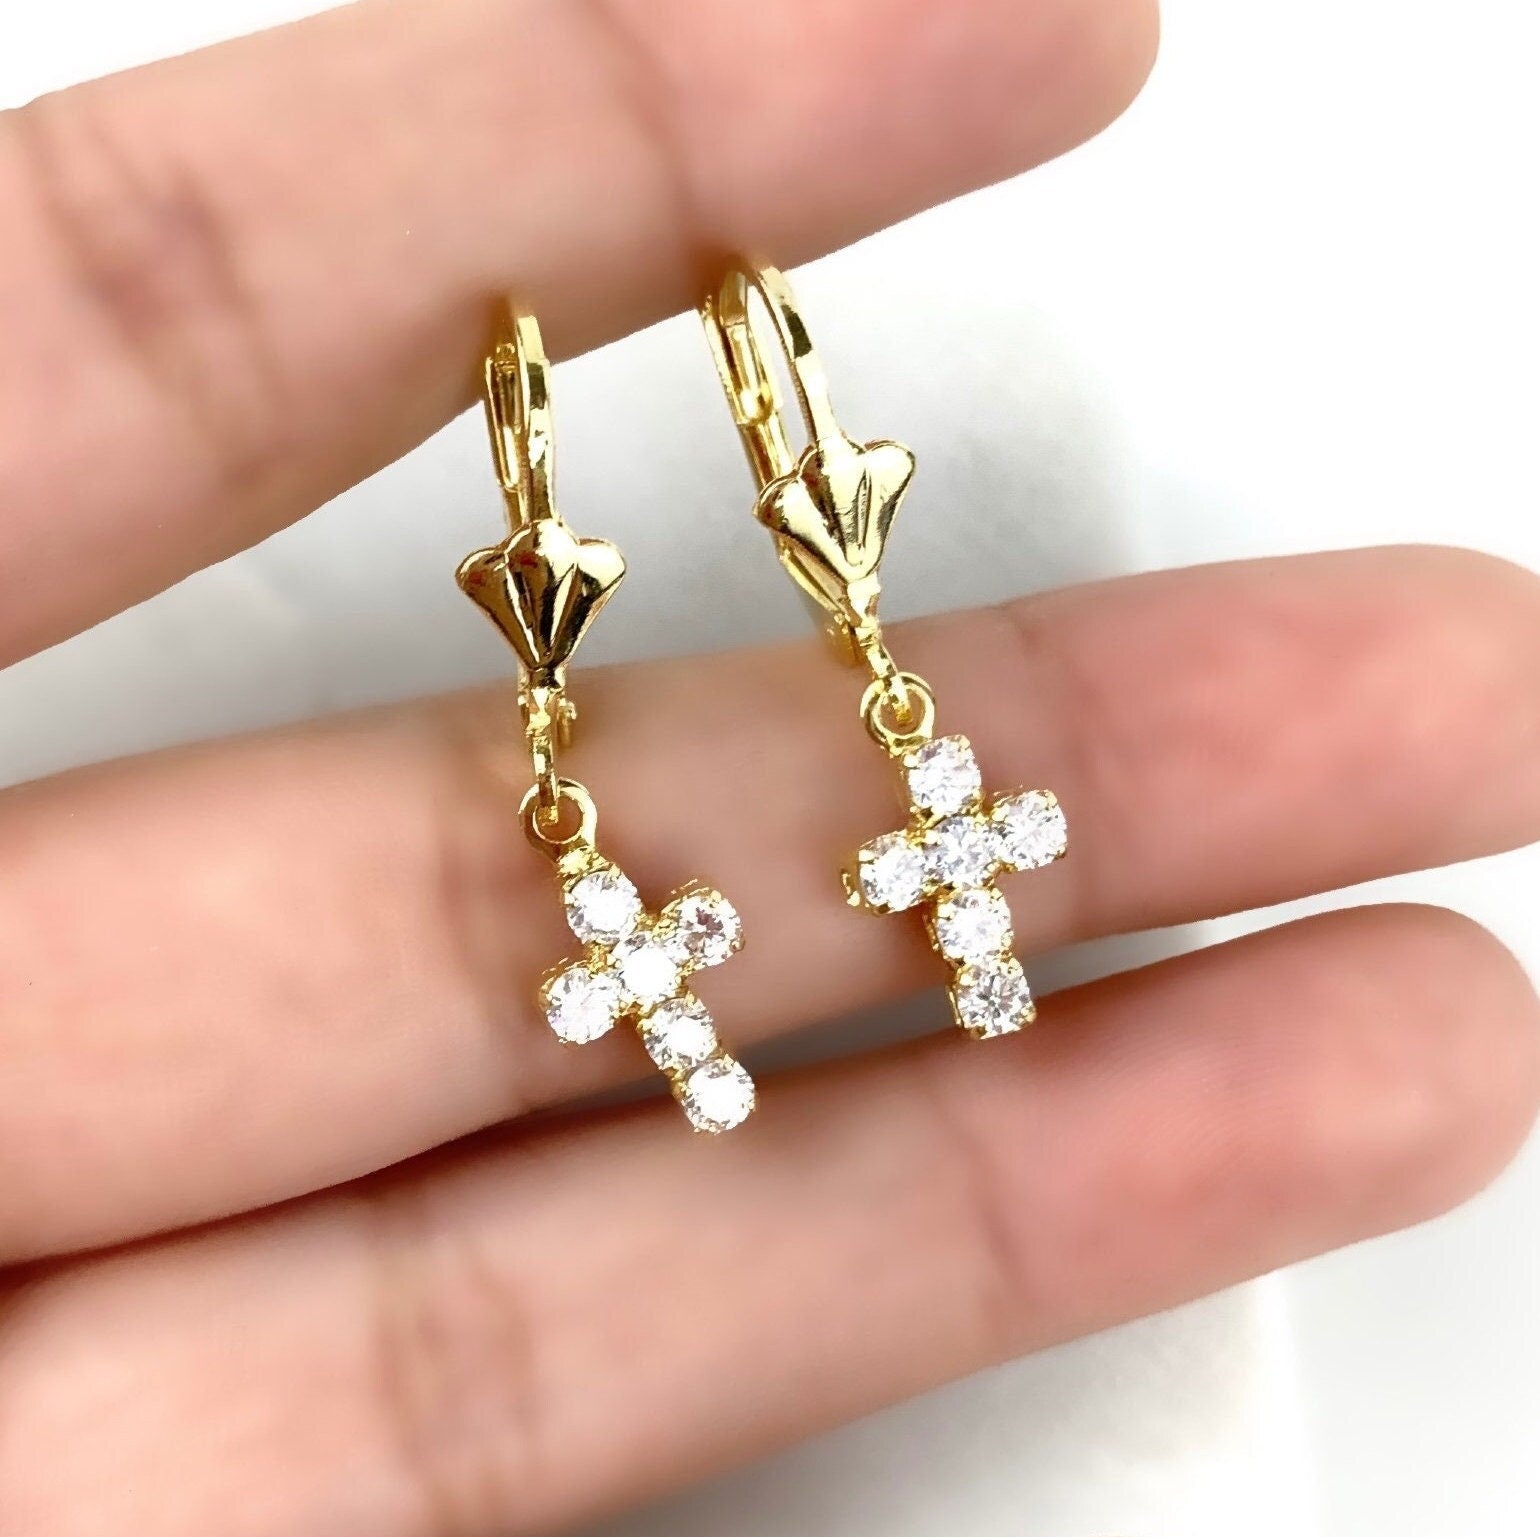 18k Gold Filled Cubic Zirconia Cross Lever Back Earrings Wholesale Jewelry Making Supplies